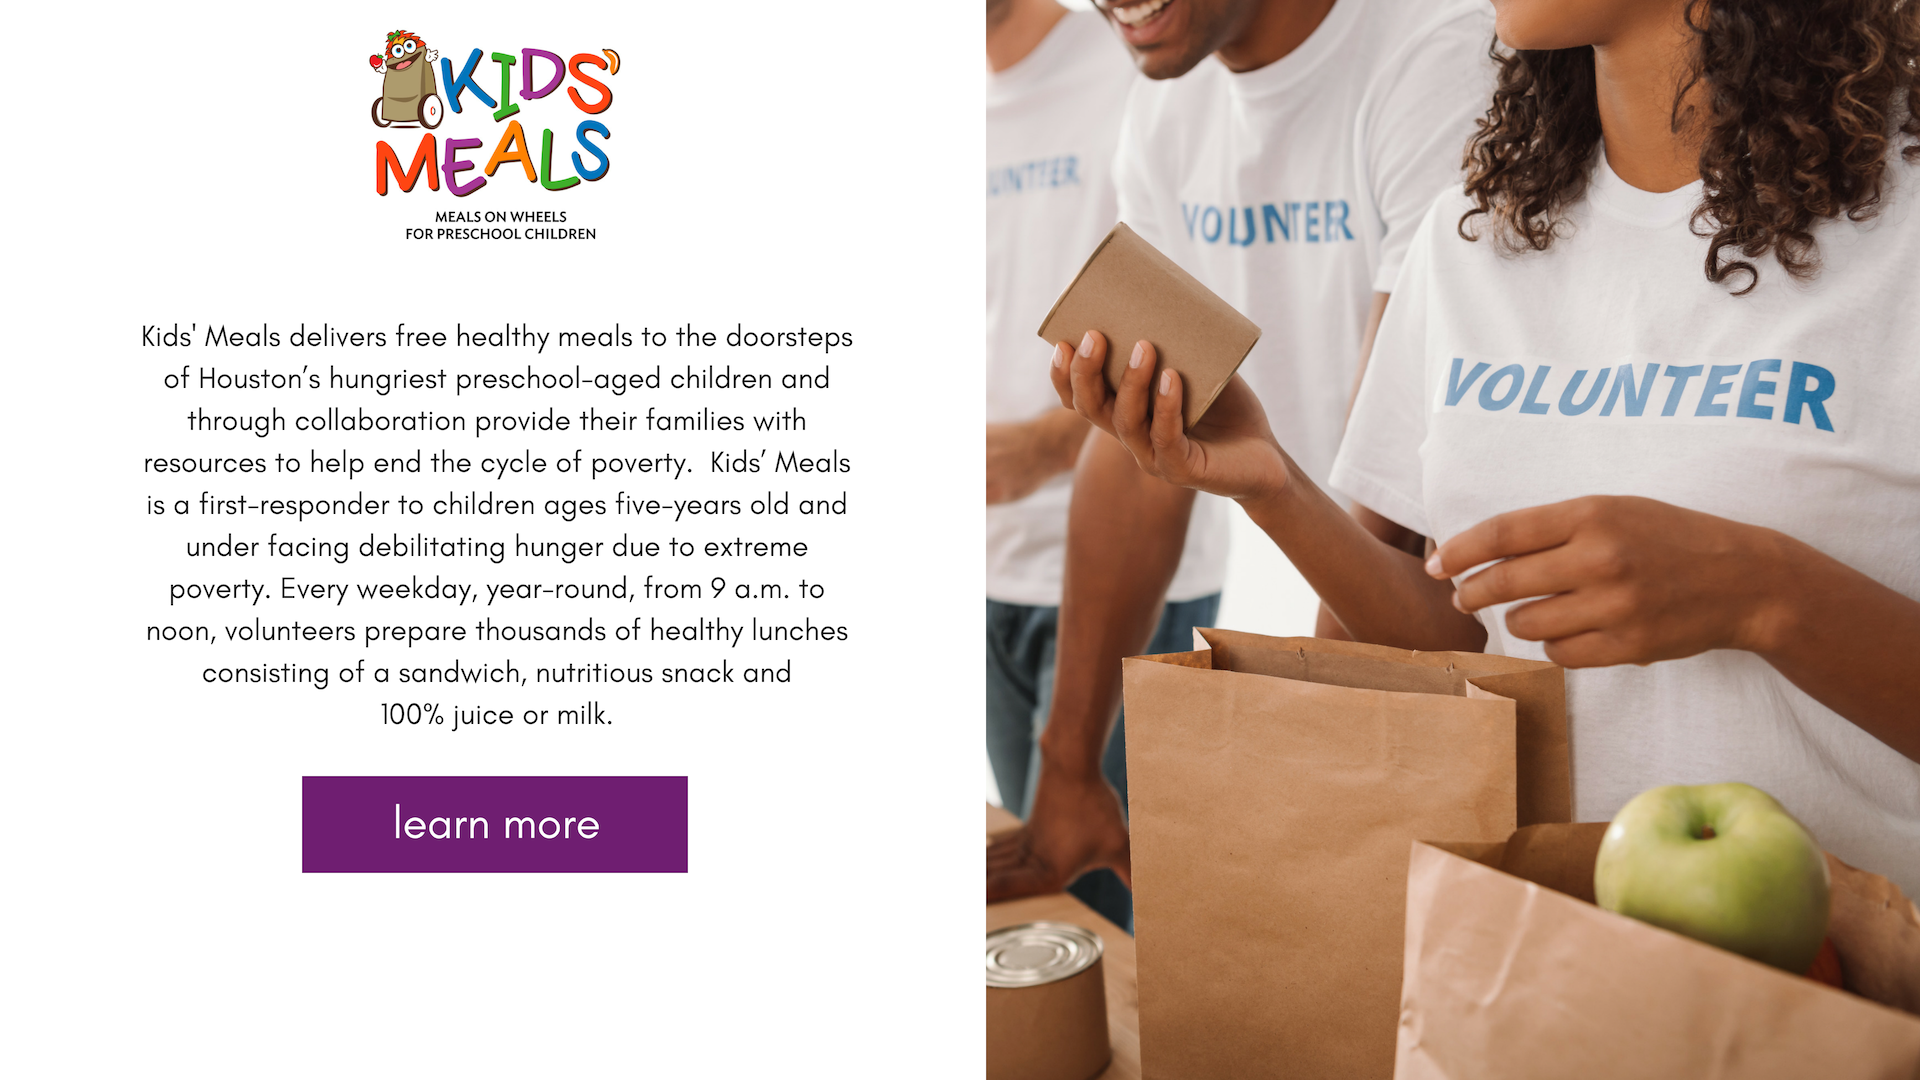 kids' meal learn more details